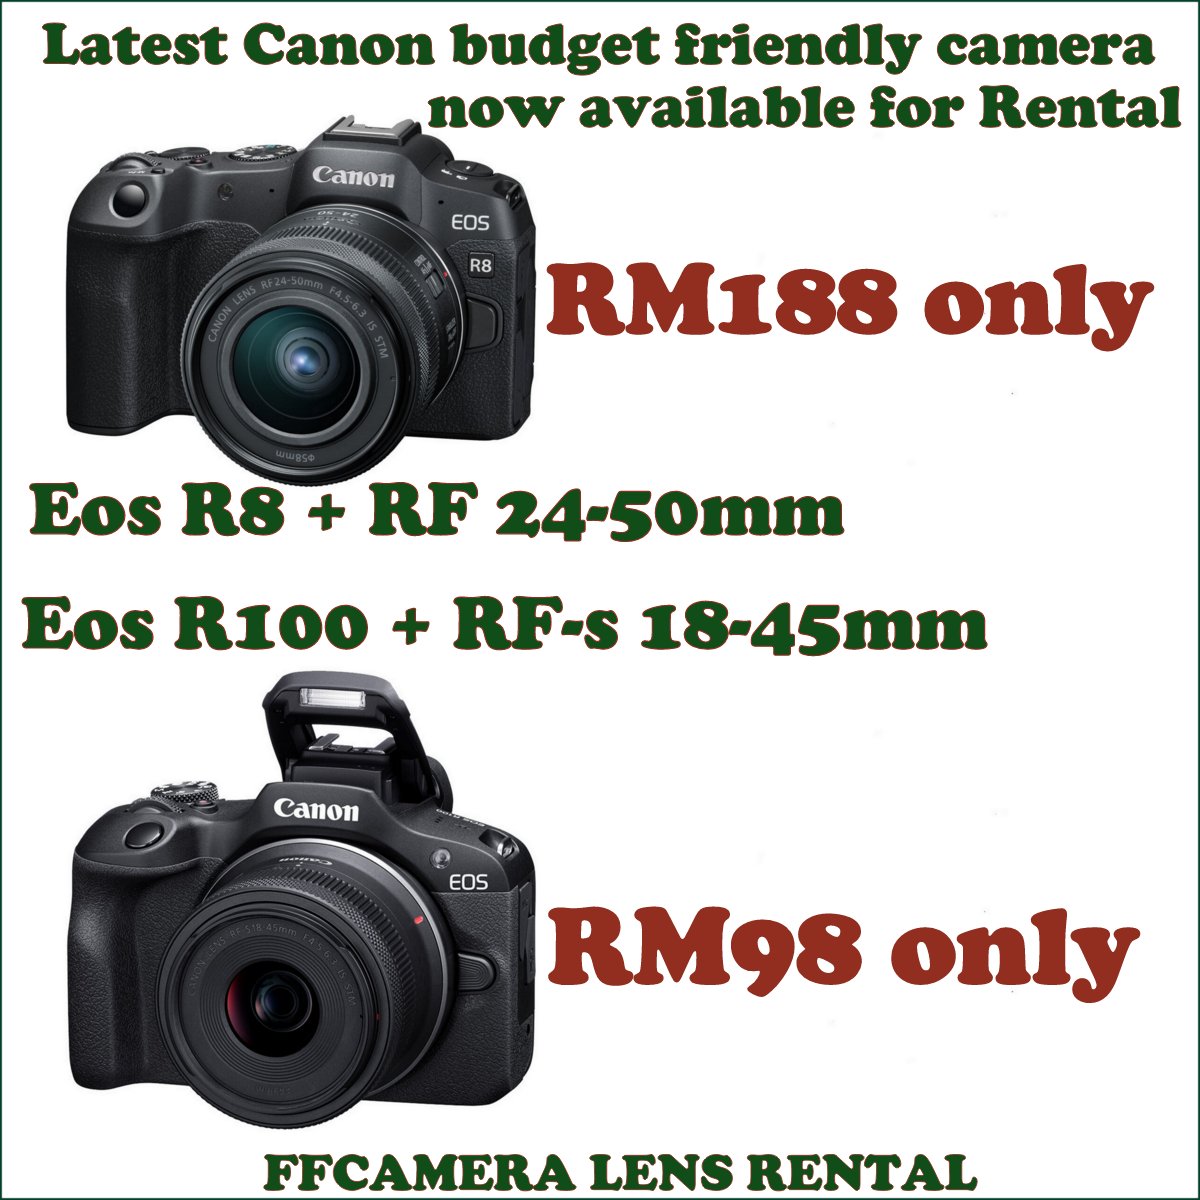 Now available for rental !! Latest addition to canon mirrorless line up 013-500 4477 019-500 4477